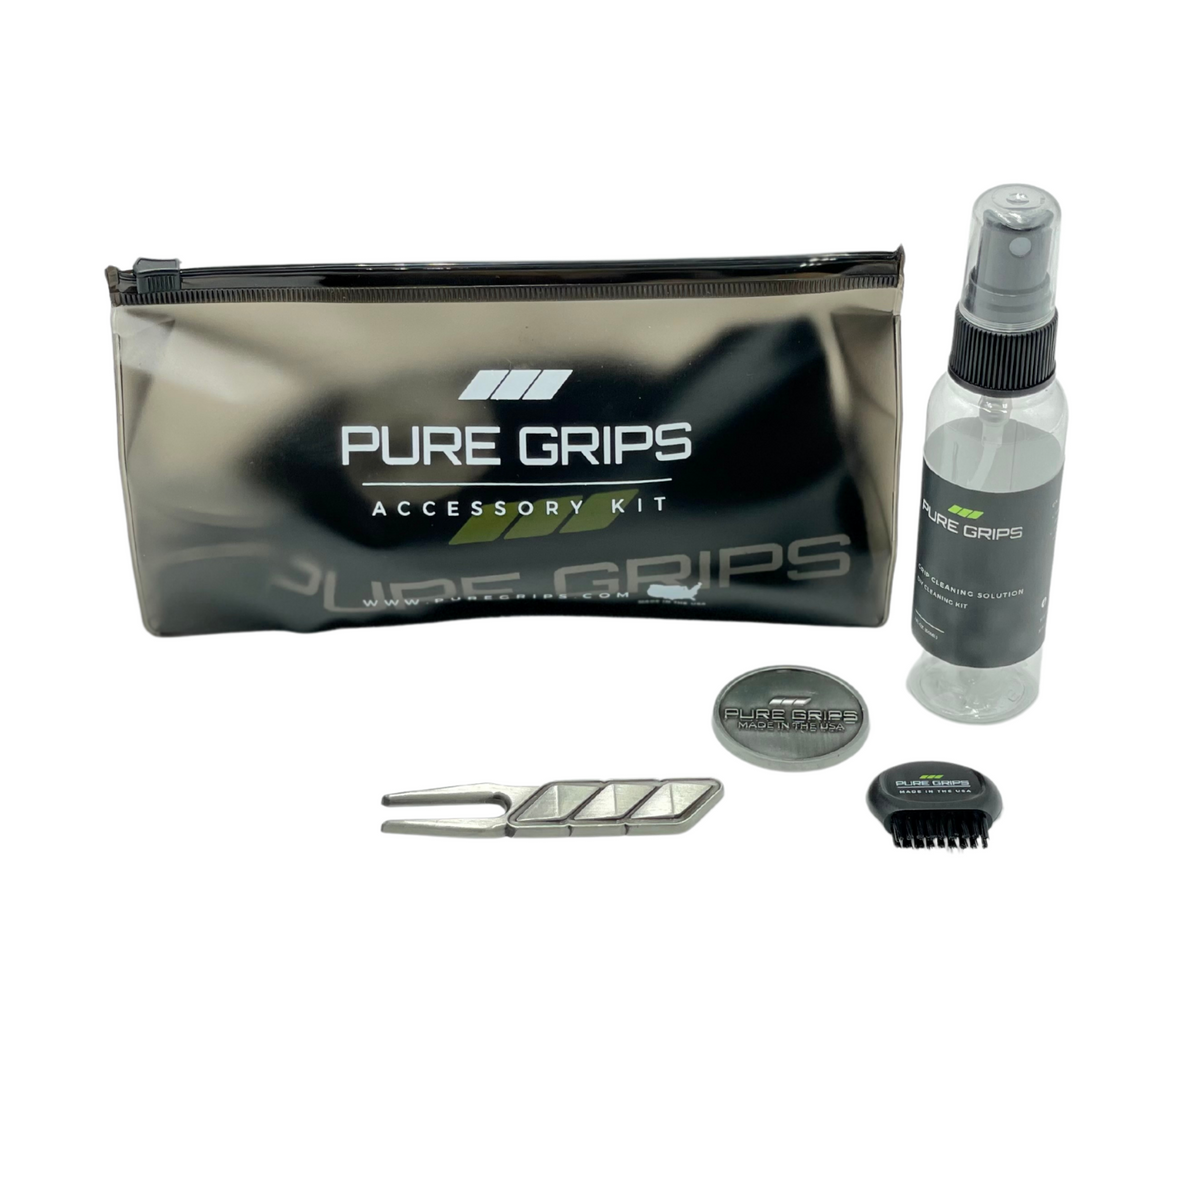 PURE Grips Accessory Kit